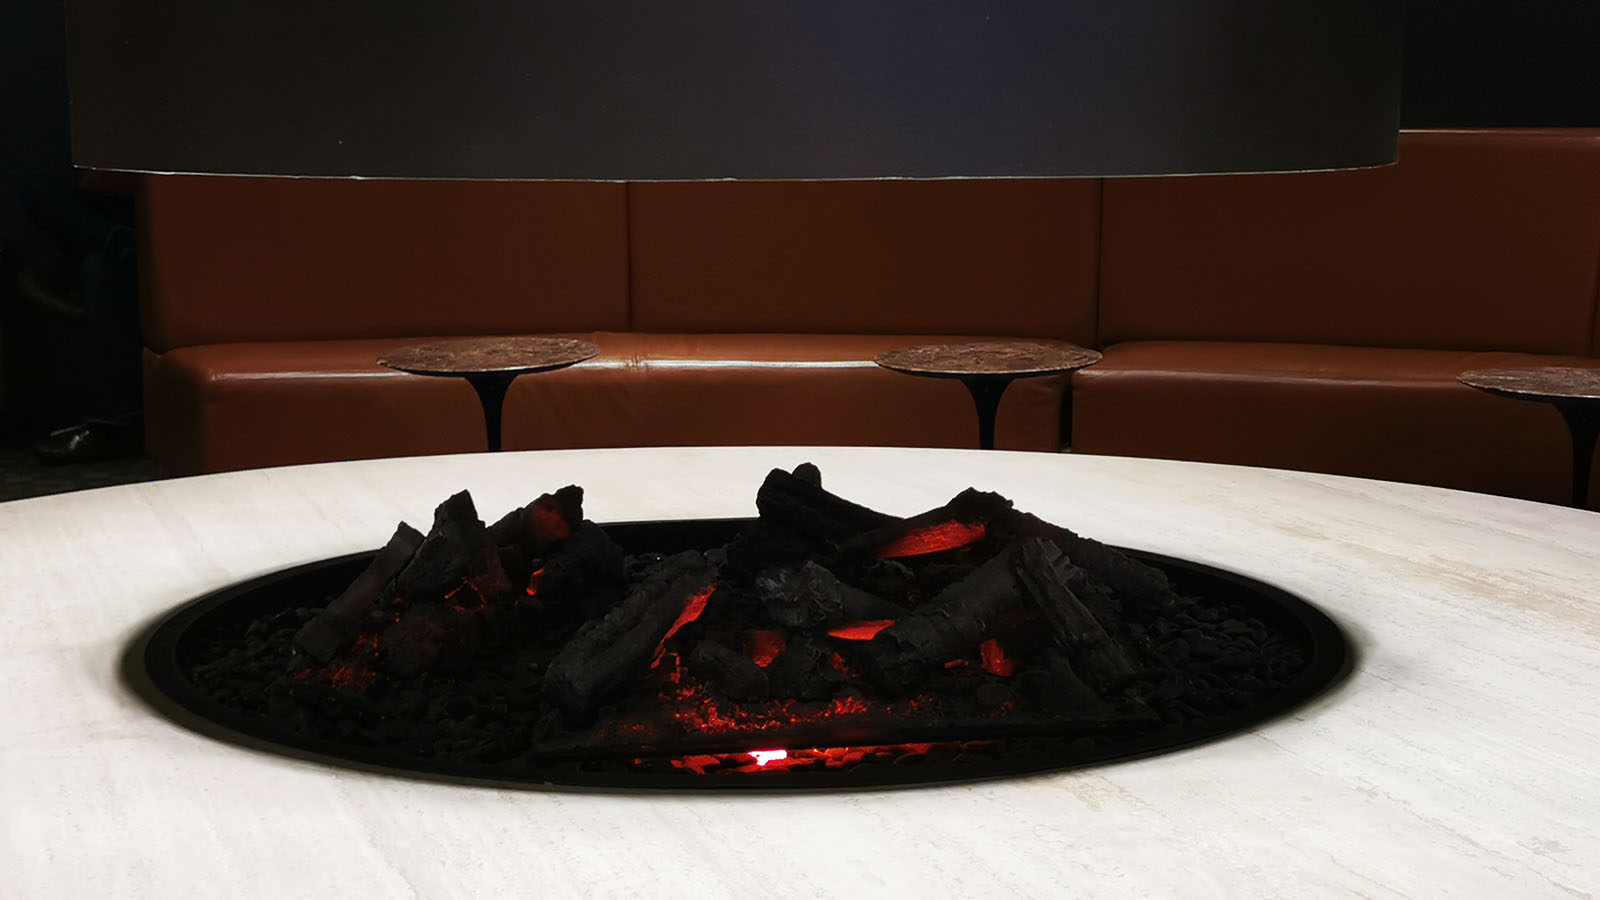 Close-up of the fireplace in the Qantas International Business Lounge in Los Angeles